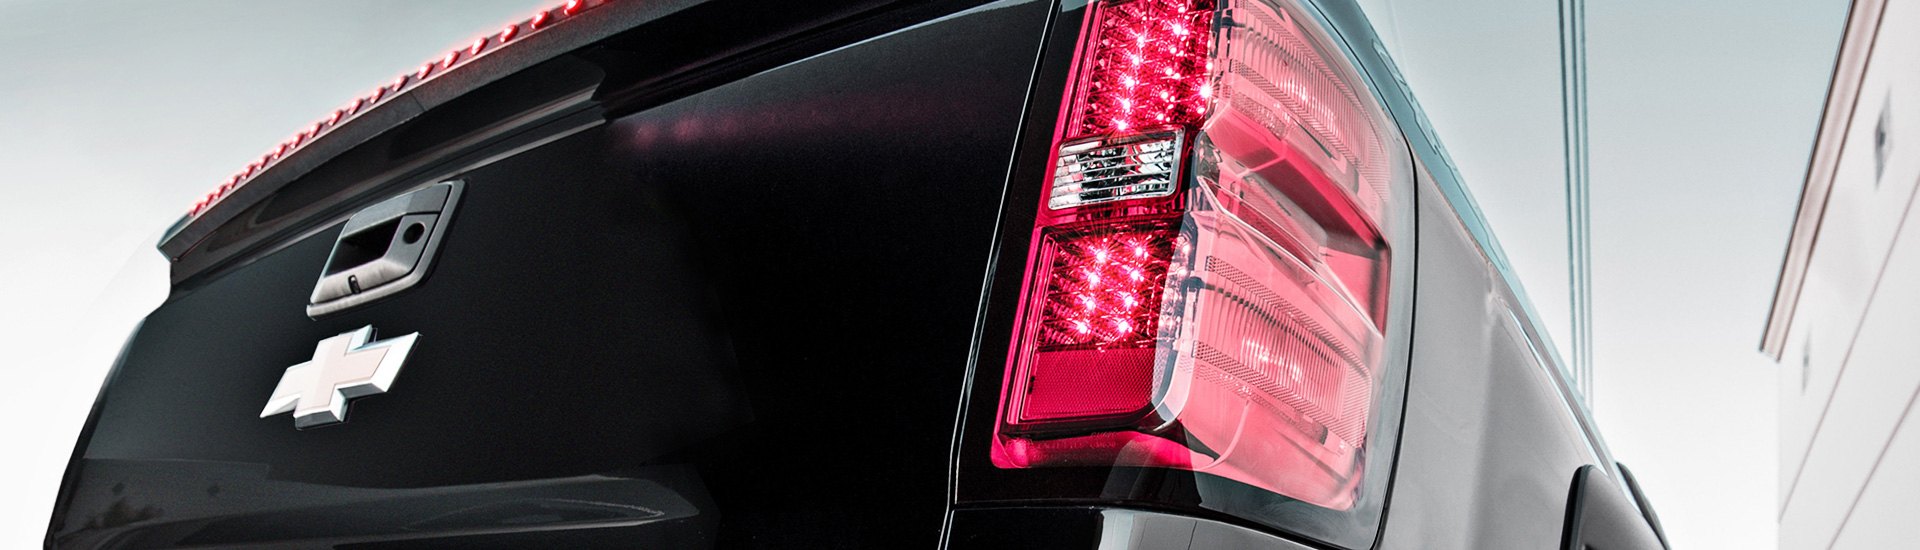 What Choices do I Have for Tail Lights?